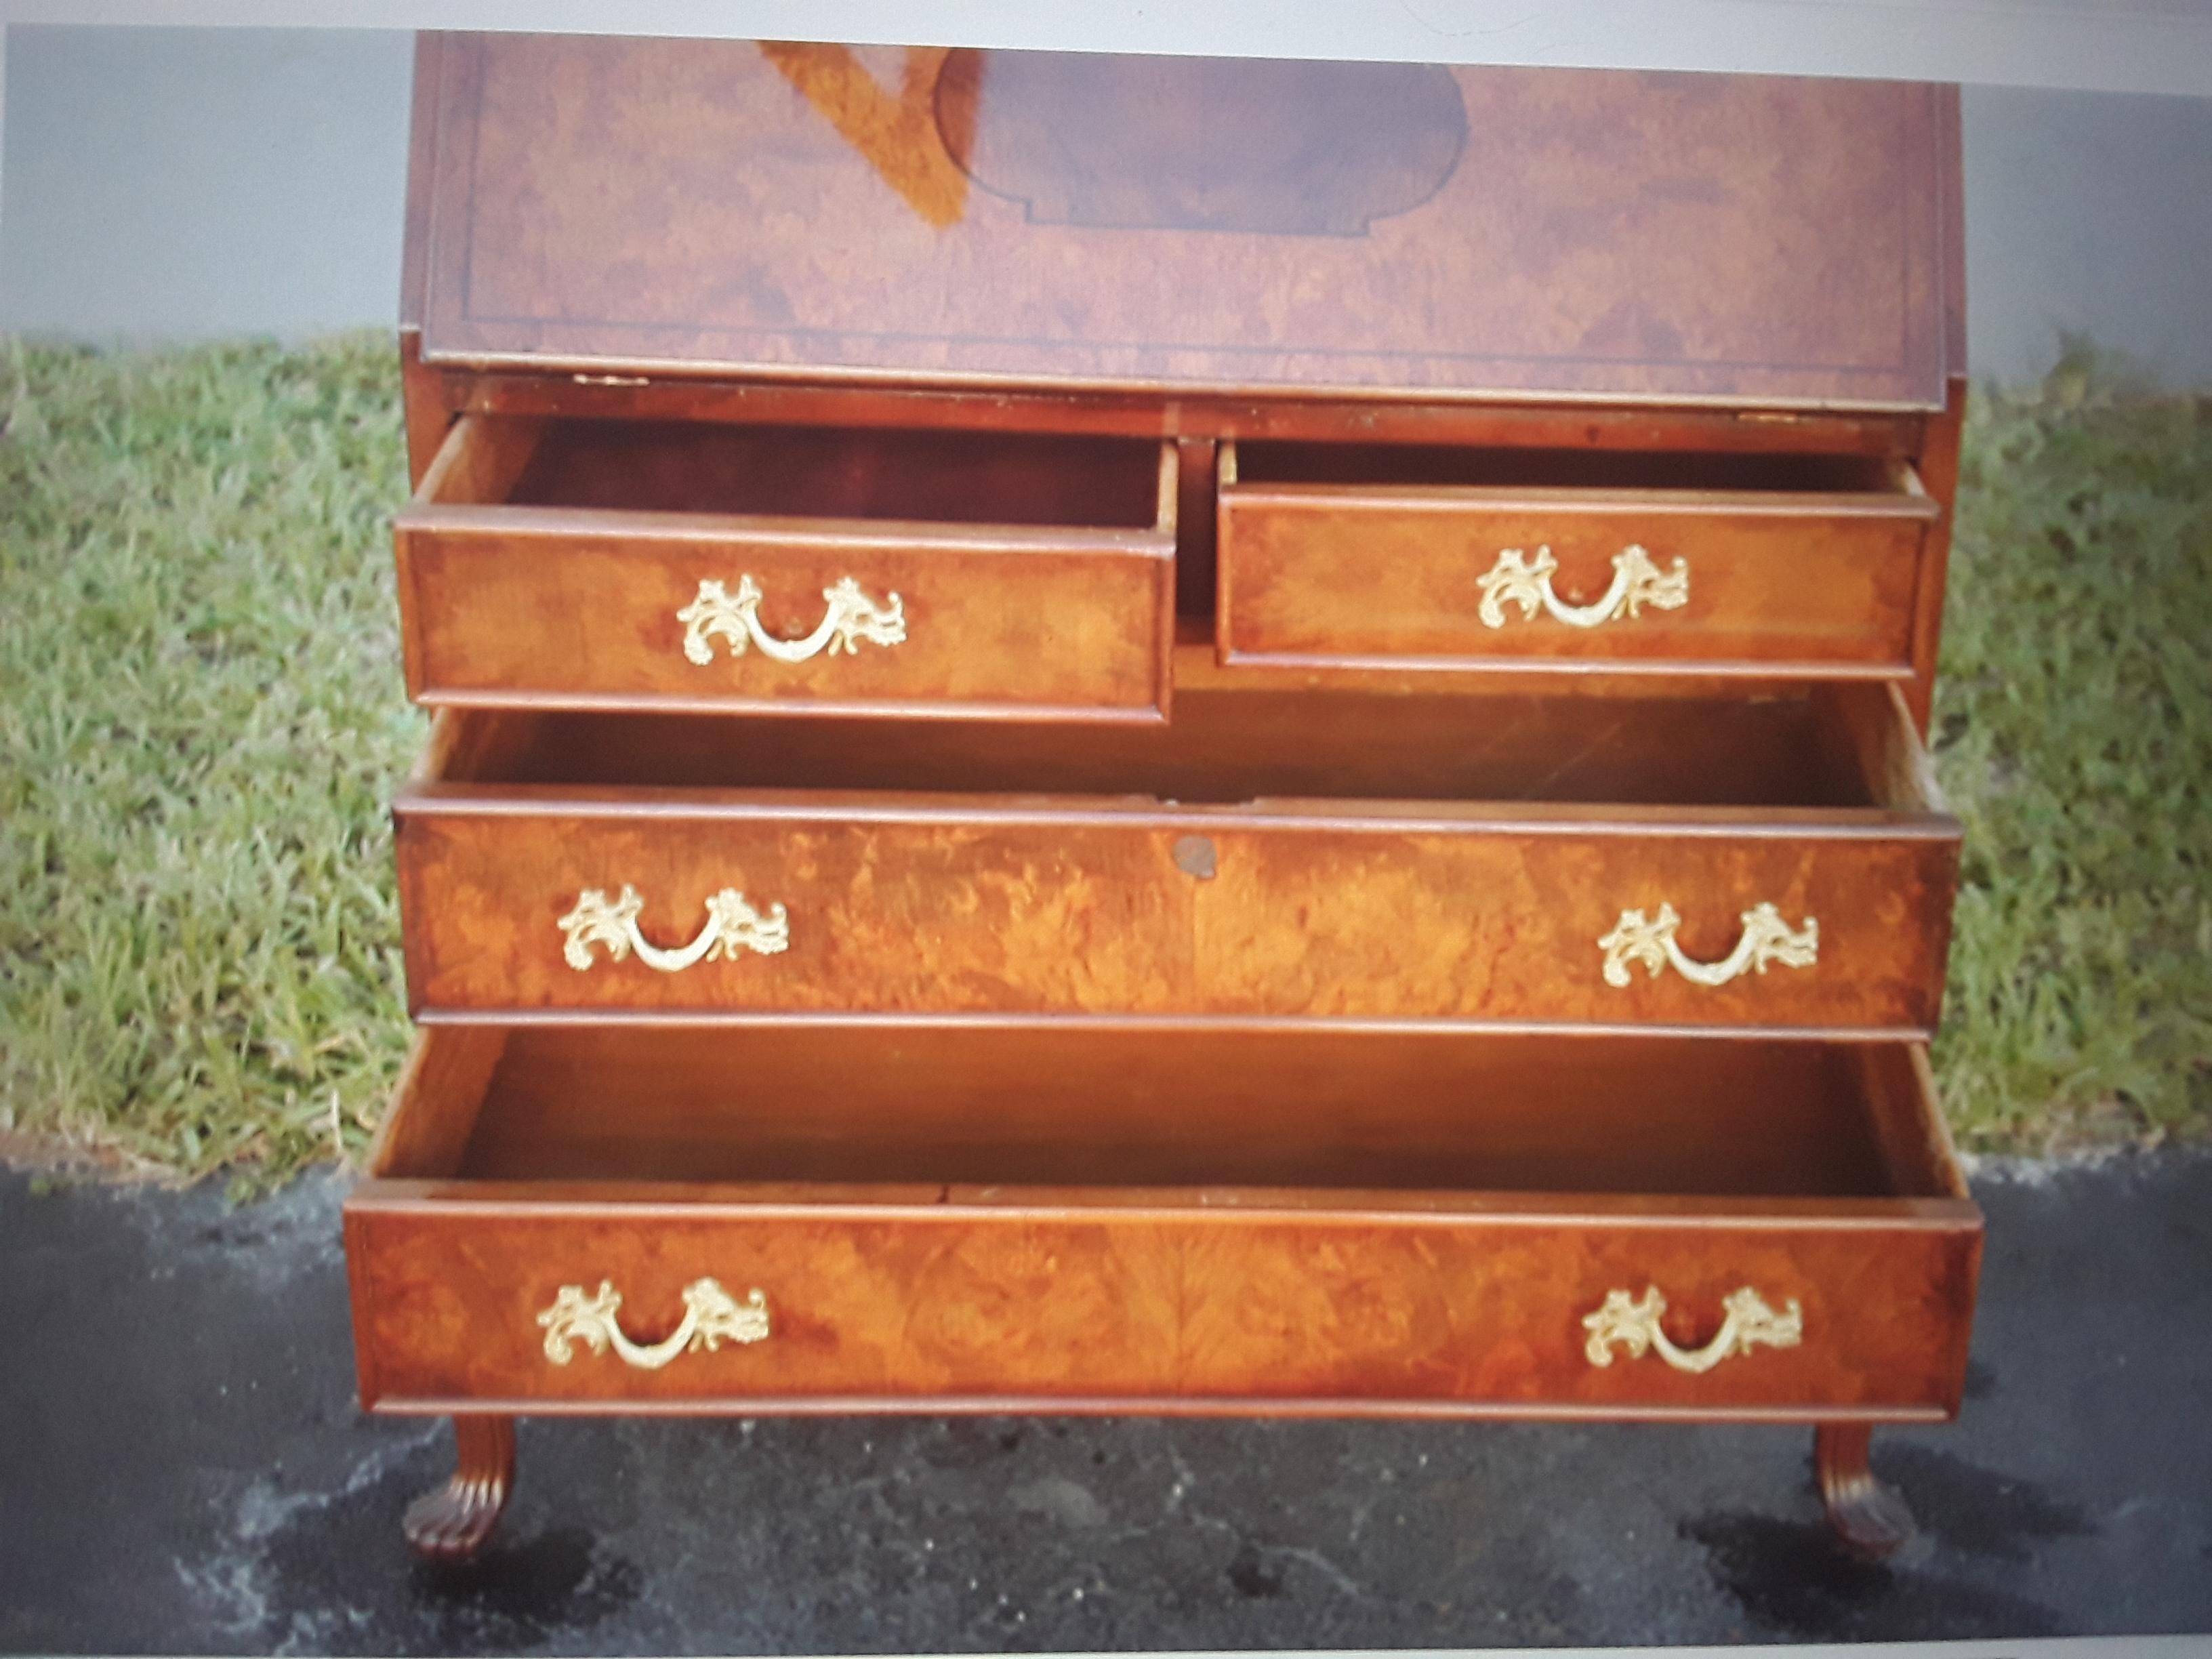 Beautiful Grand Scale 1940's Traditional style Burl Wood Secretary/ Writing Desk.
This secretary is in very good condition. Miami Beach acquisition.